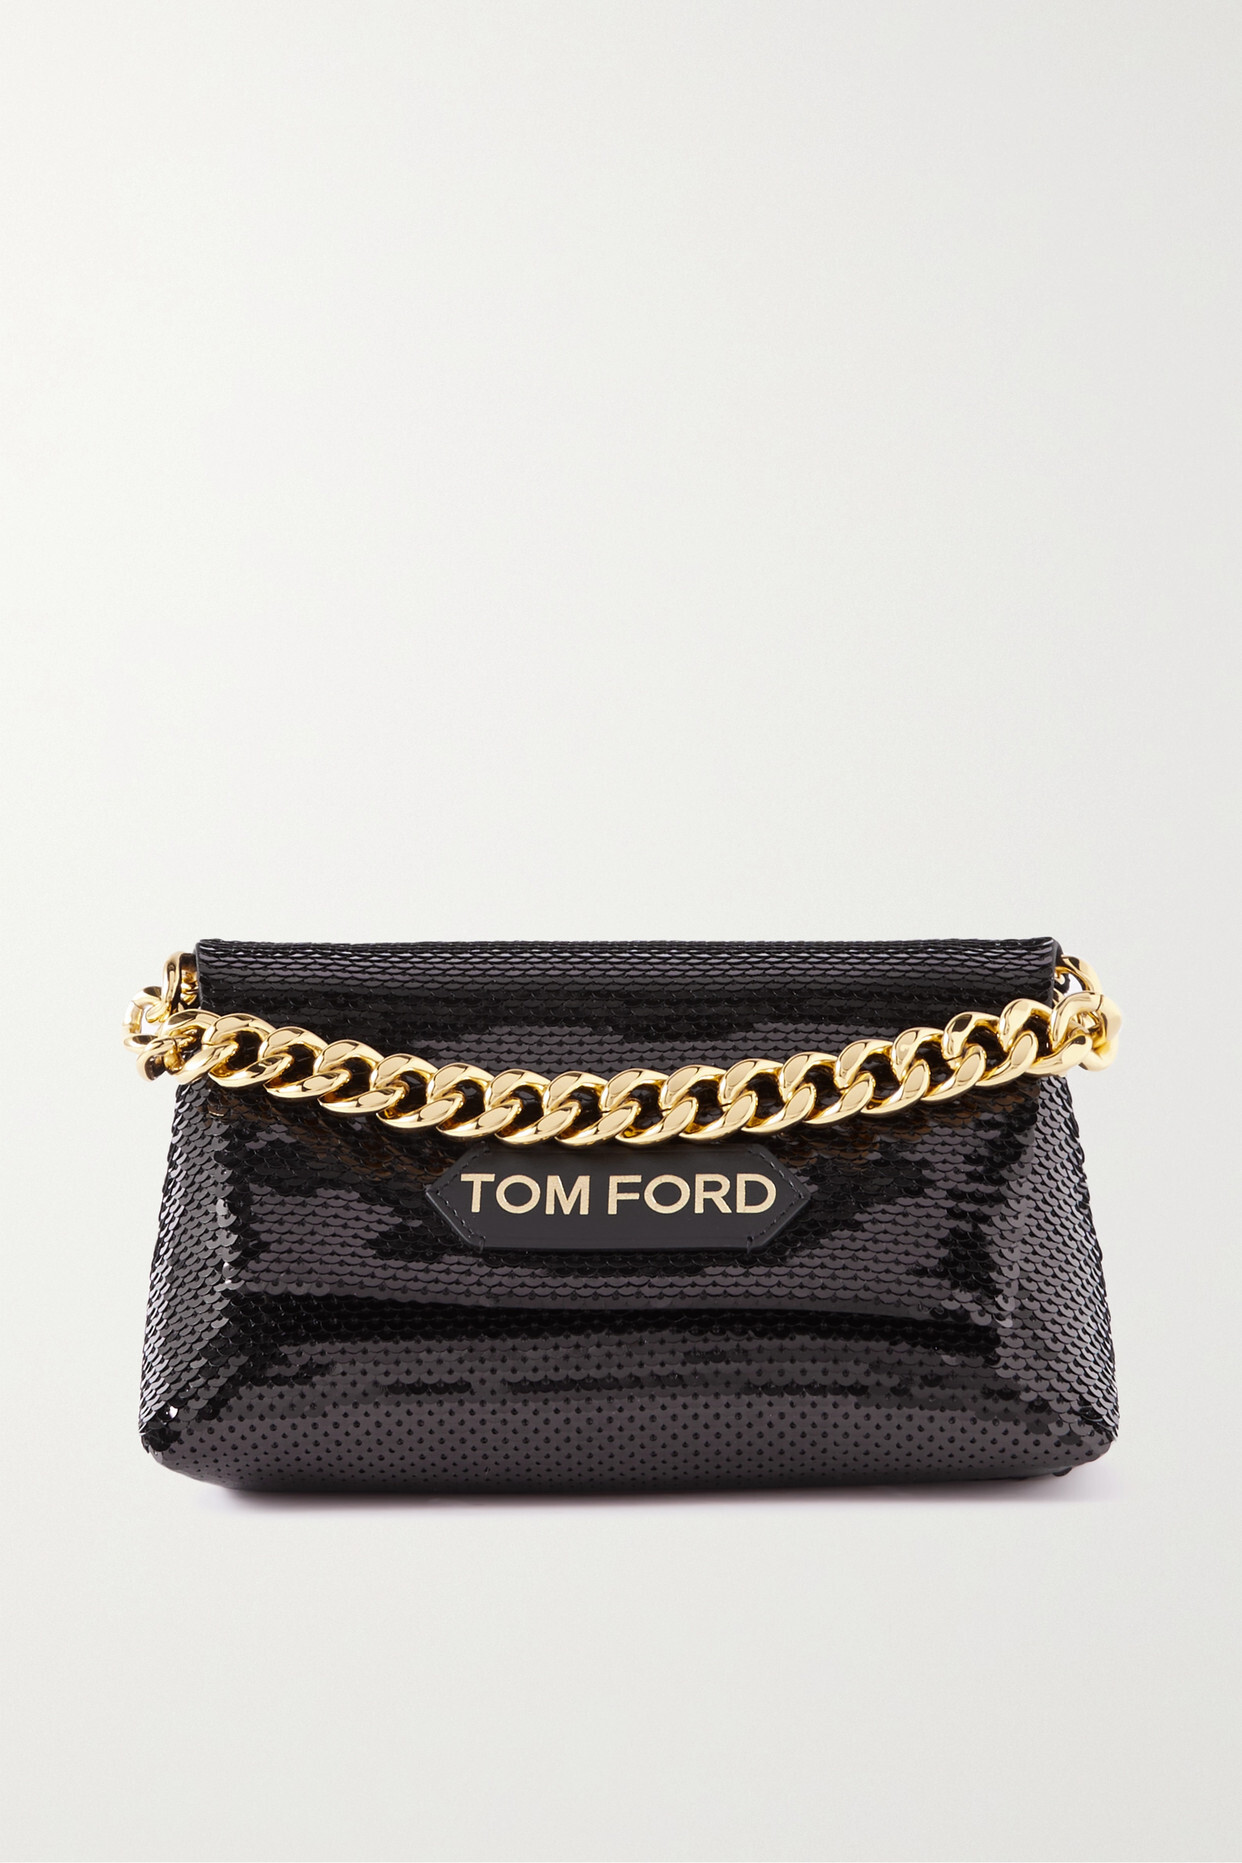 TOM FORD - Mini Sequined Leather Clutch - Black